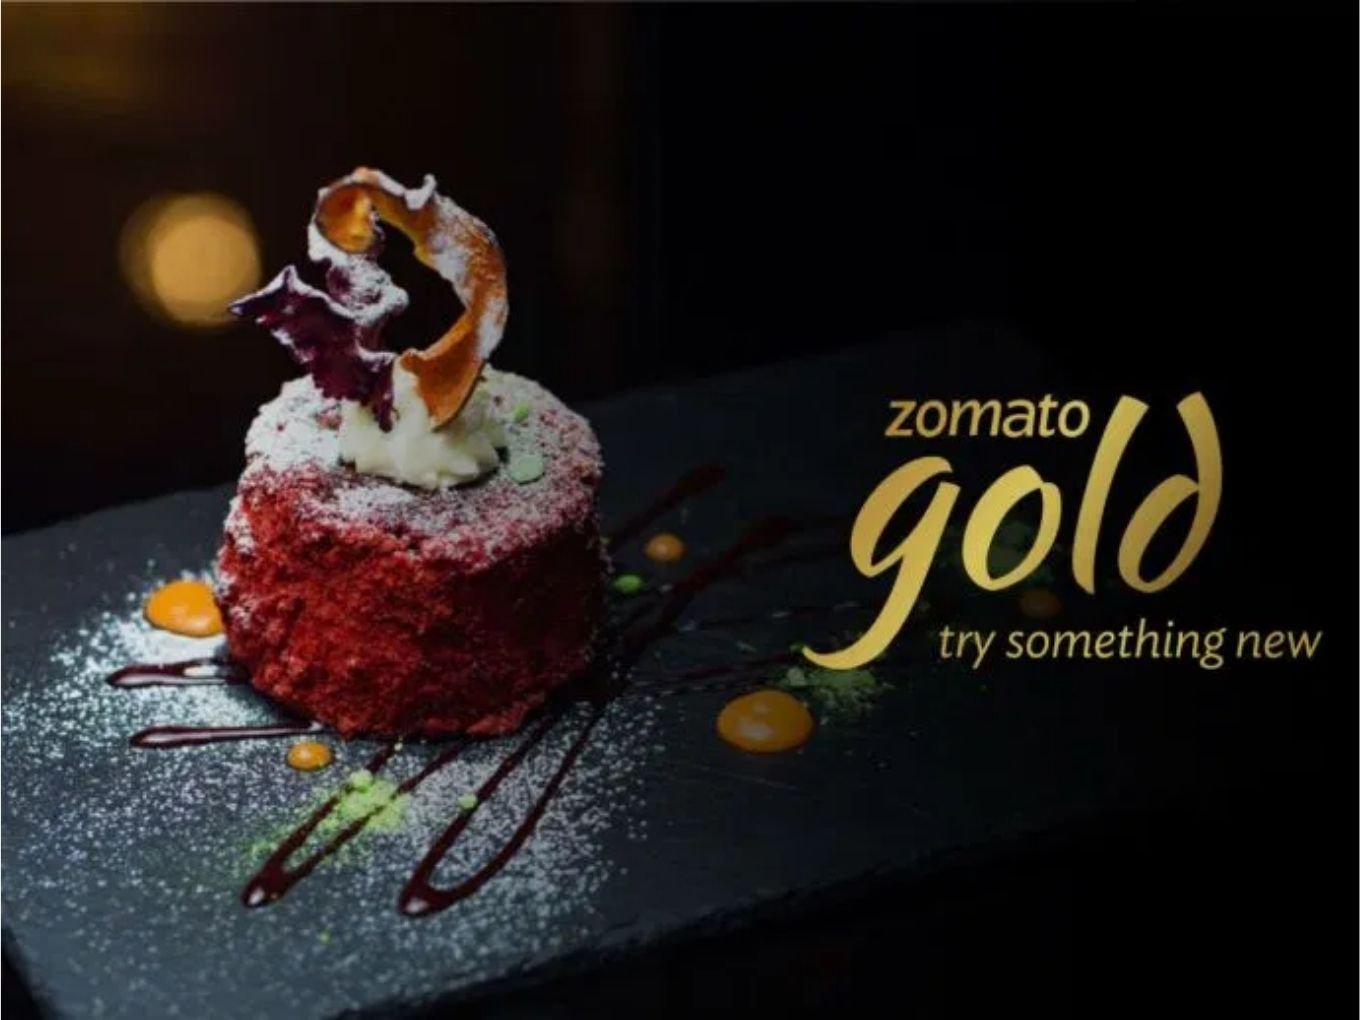 Zomato Says Gold Subscriptions On The Rise As NRAI Claim Otherwise